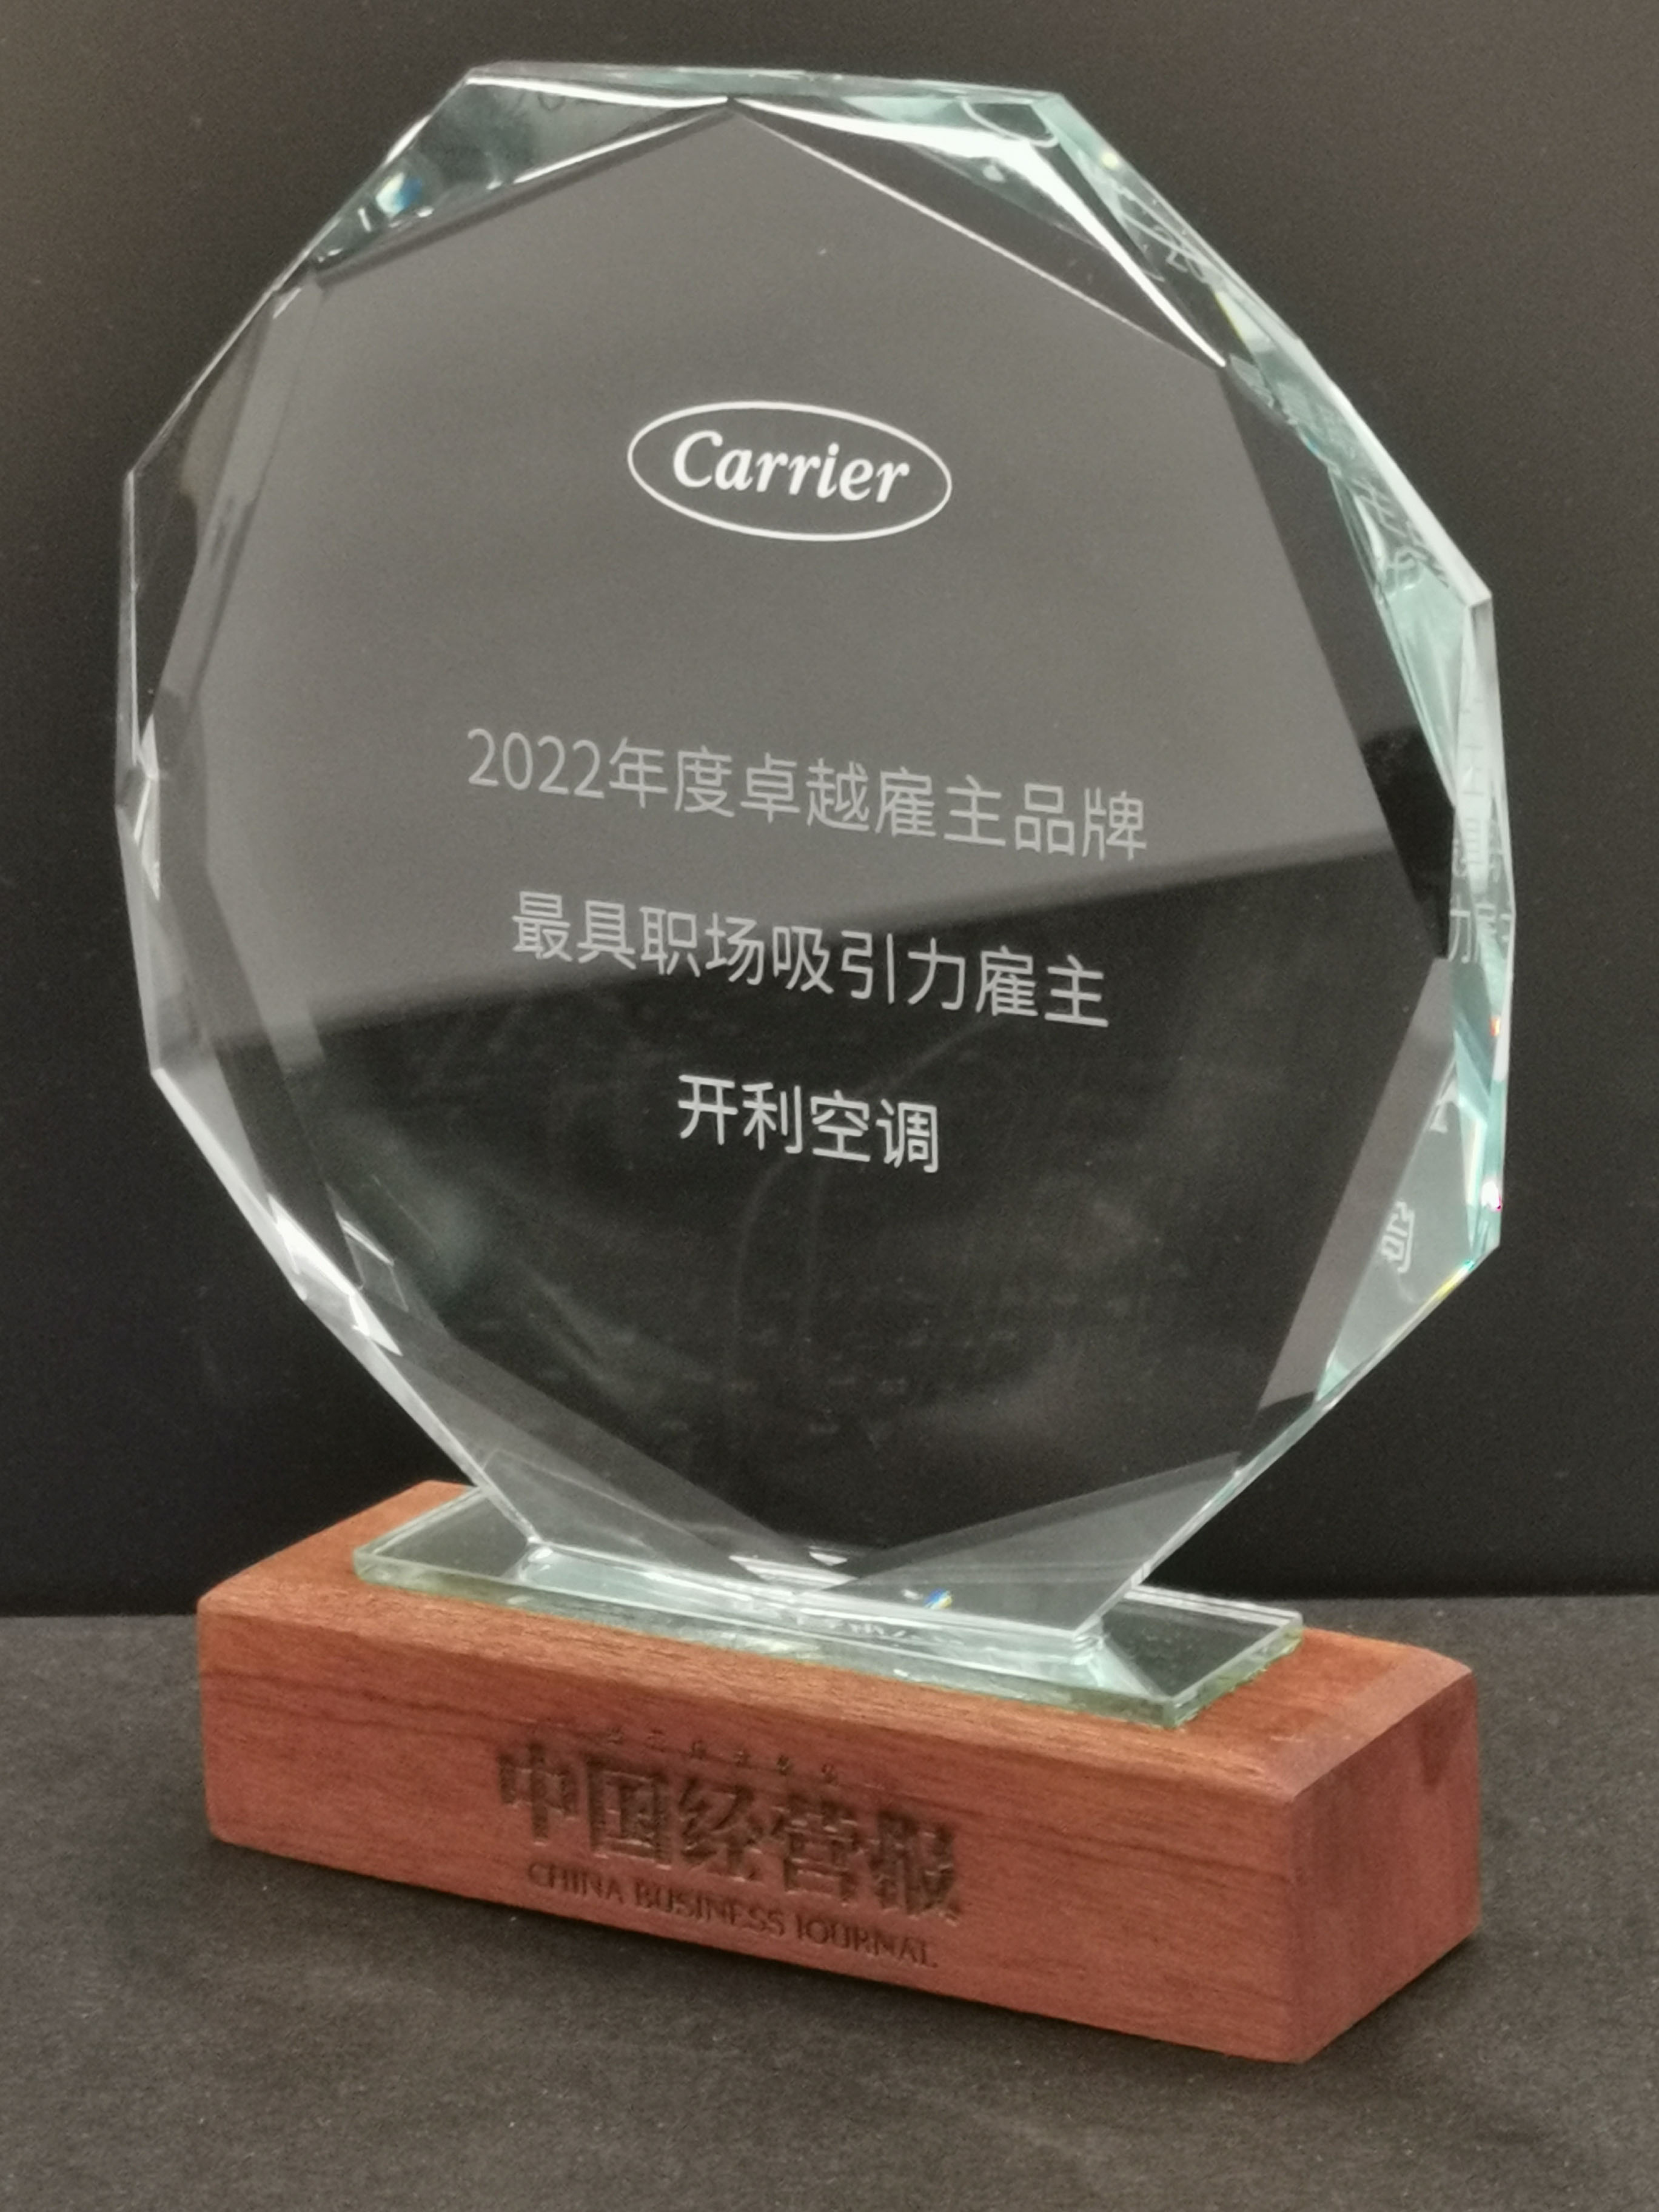 Carrier-Most-Attractive-Companies-to-Work-For-in-China-in-2022